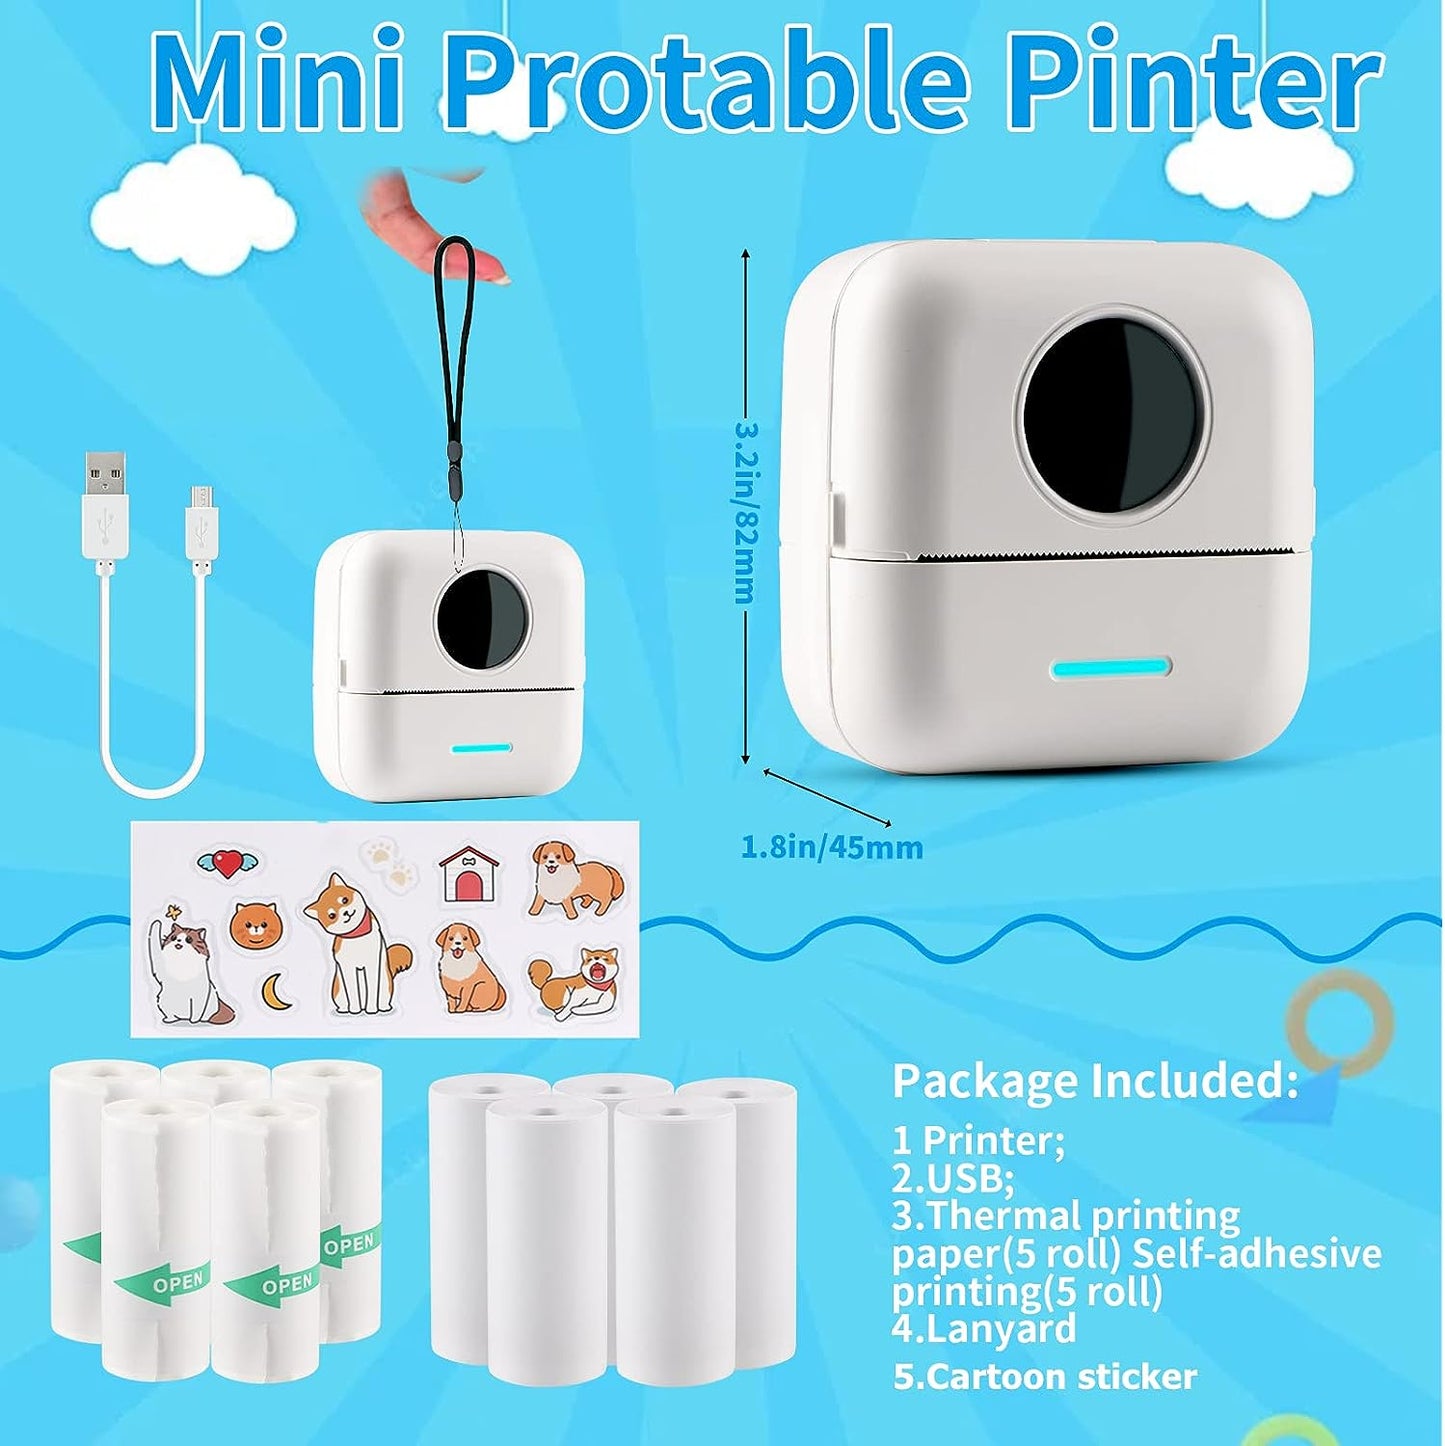 Mini Sticker Printer Bluetooth Smart Pocket Inkless Thermal Printer with 10 Rolls Thermal Paper and Sticker for iOS&Android, Portable Receipt Printer for Photo Journal Notes Memo